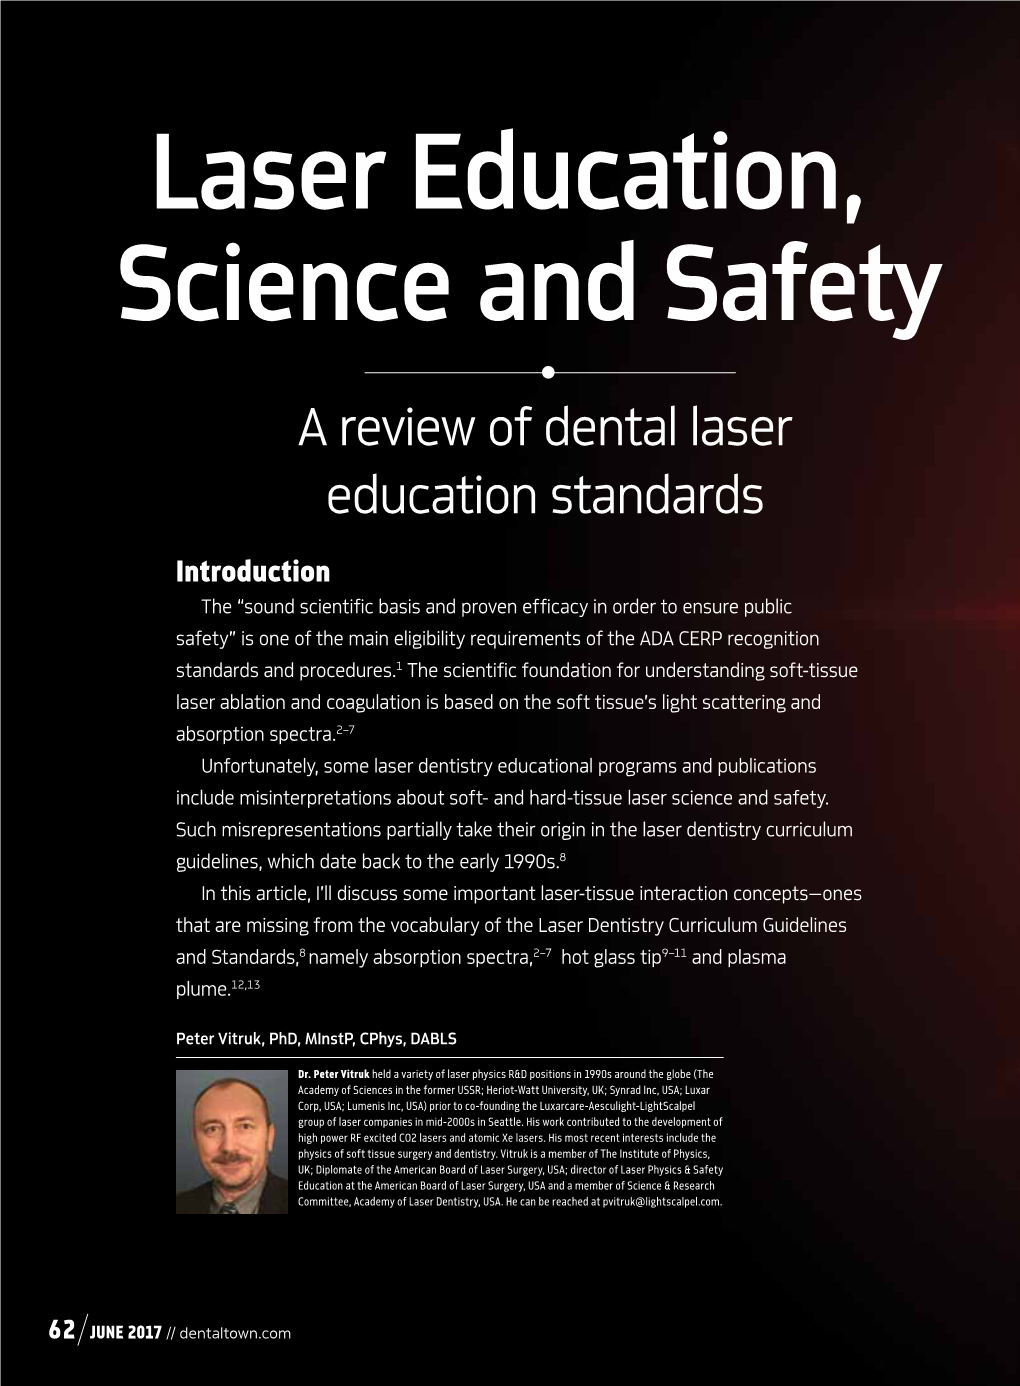 Laser Education, Science and Safety